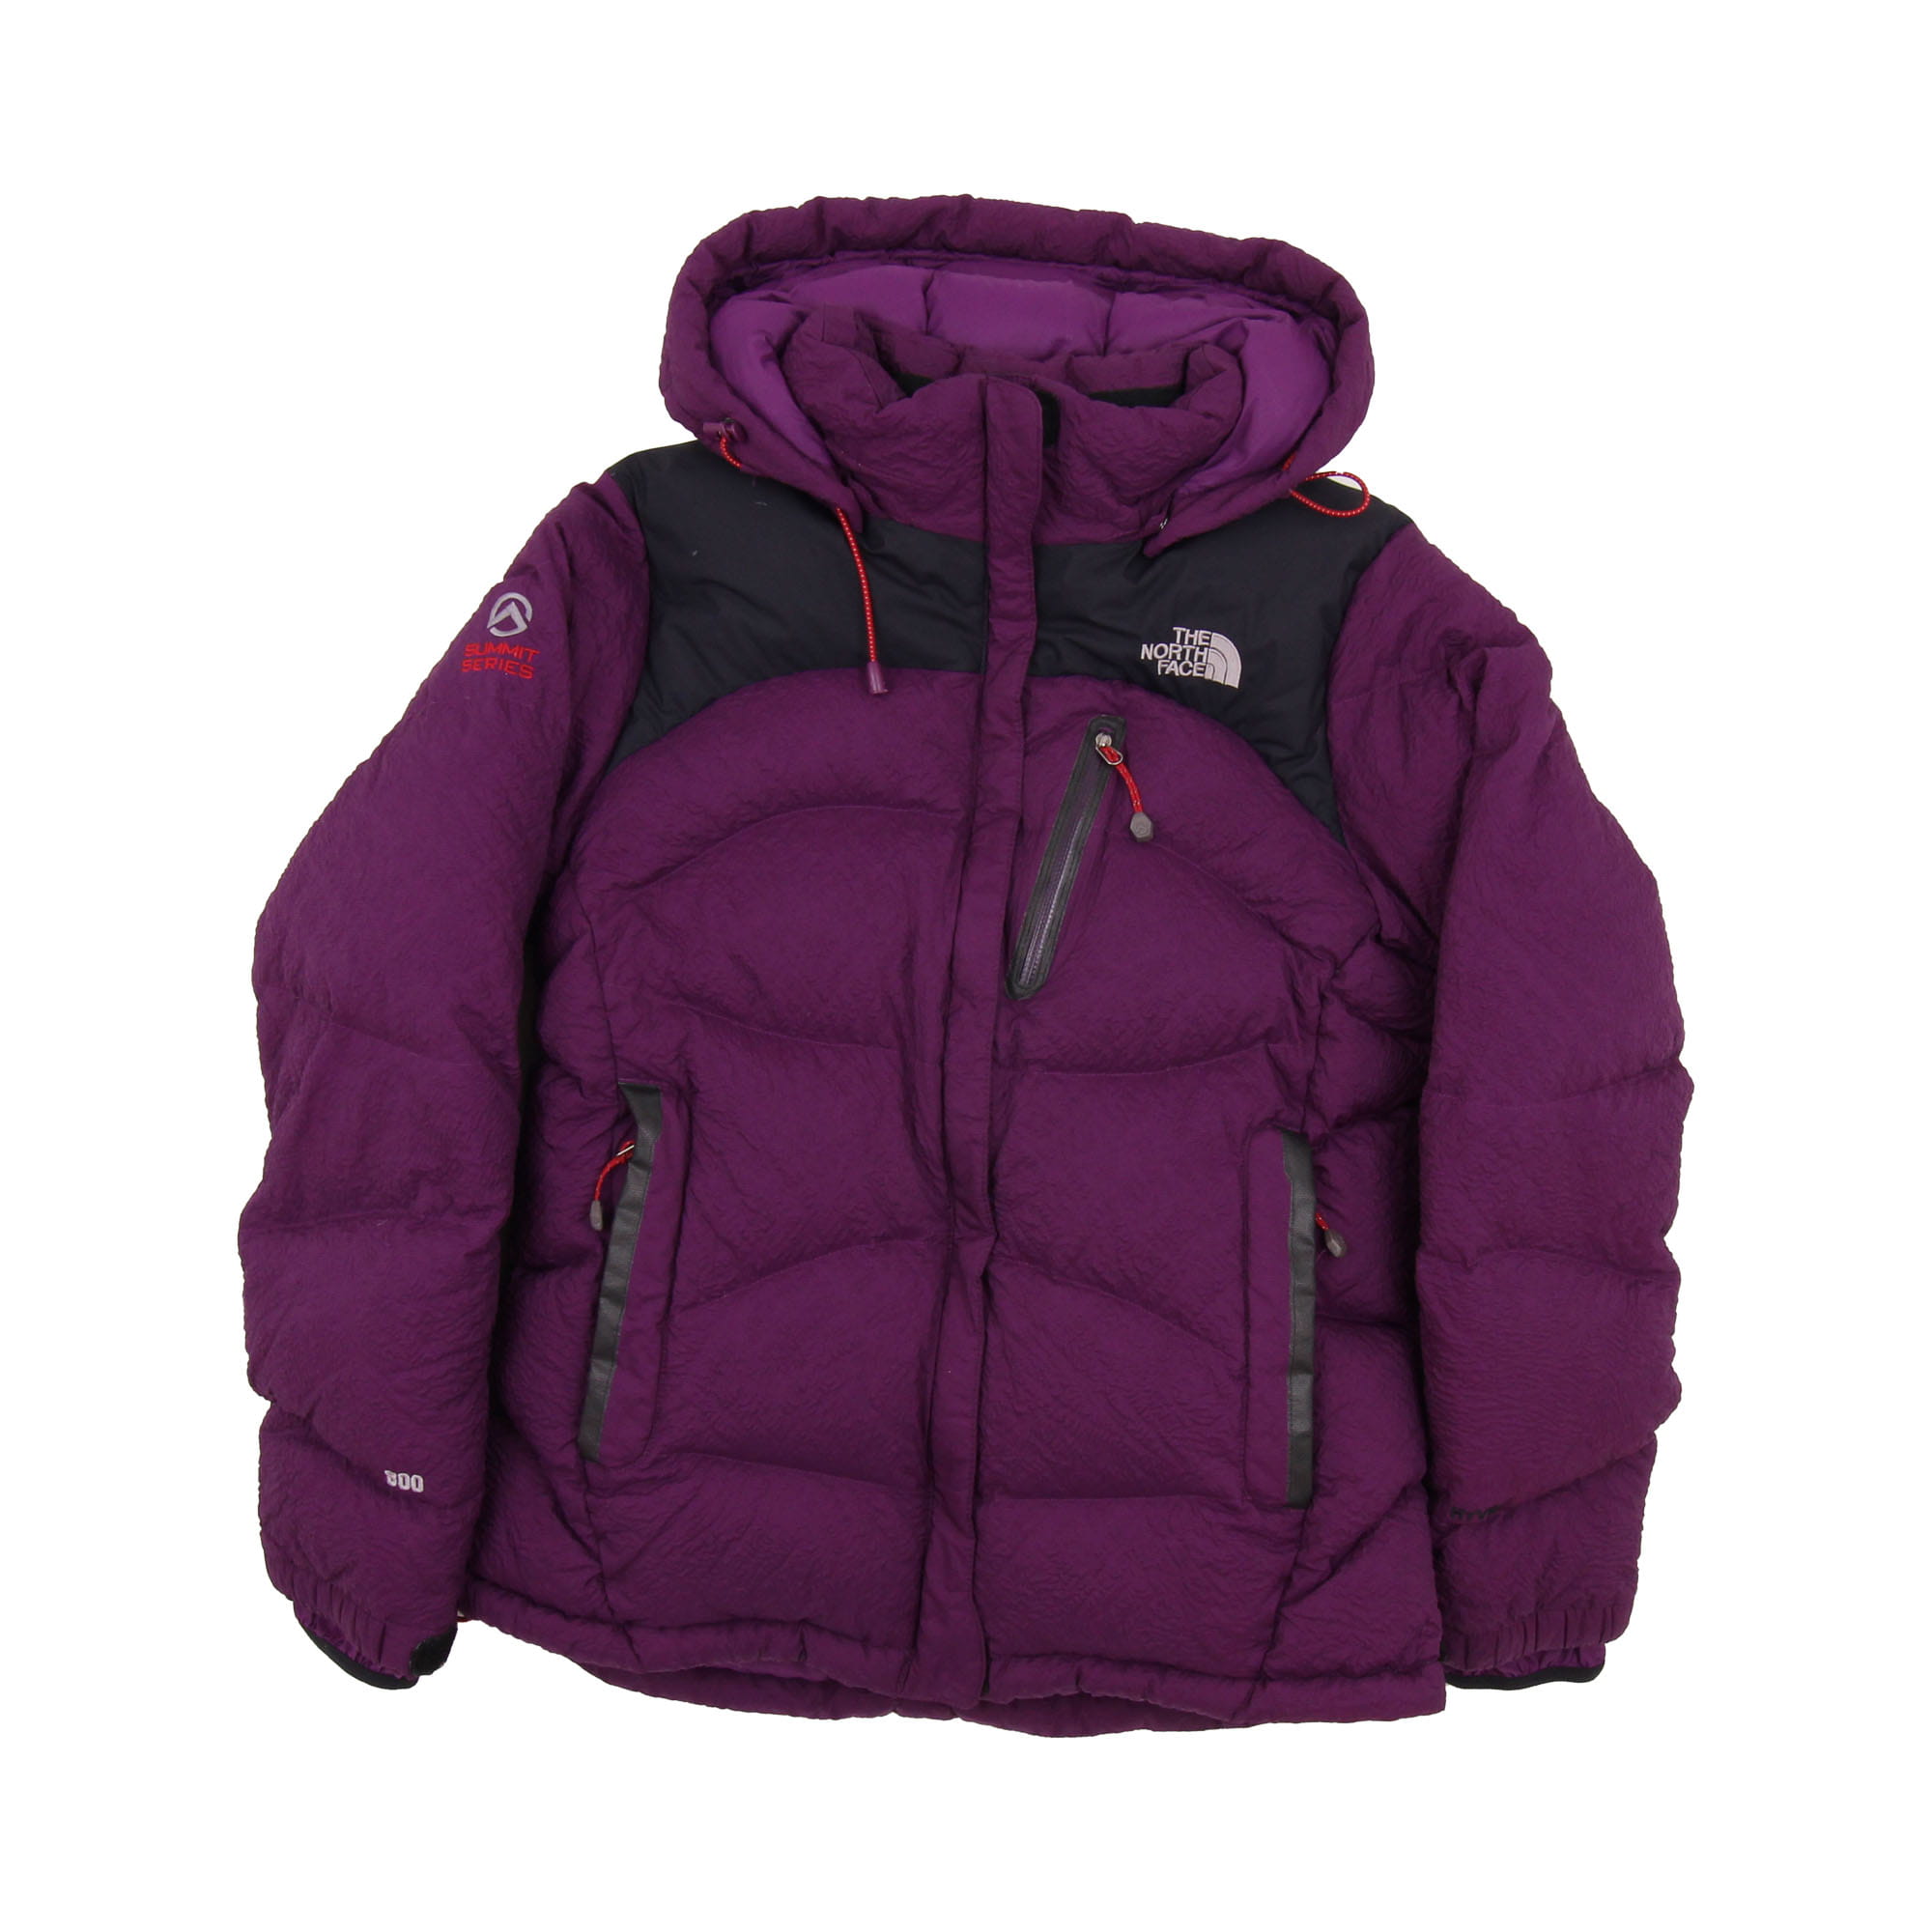 The North Face Summit Series Puffer Jacket -  XS/S